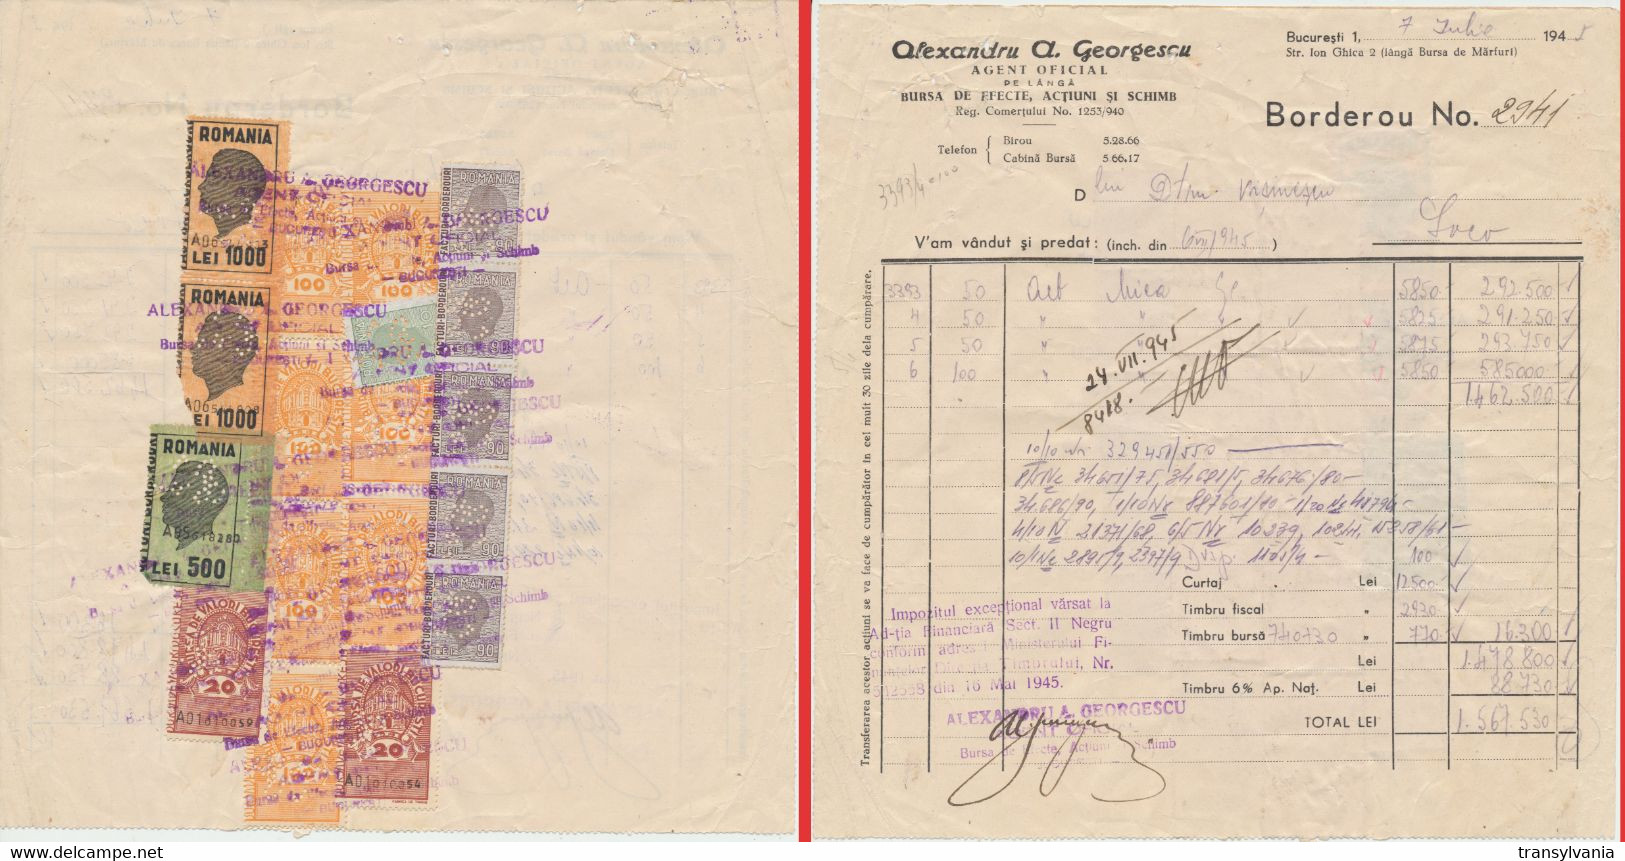 Romania 1945 Document Trade Agent Alexandru Georgescu With Perfins Inflation Revenue & Bourse Stamps - Fiscali